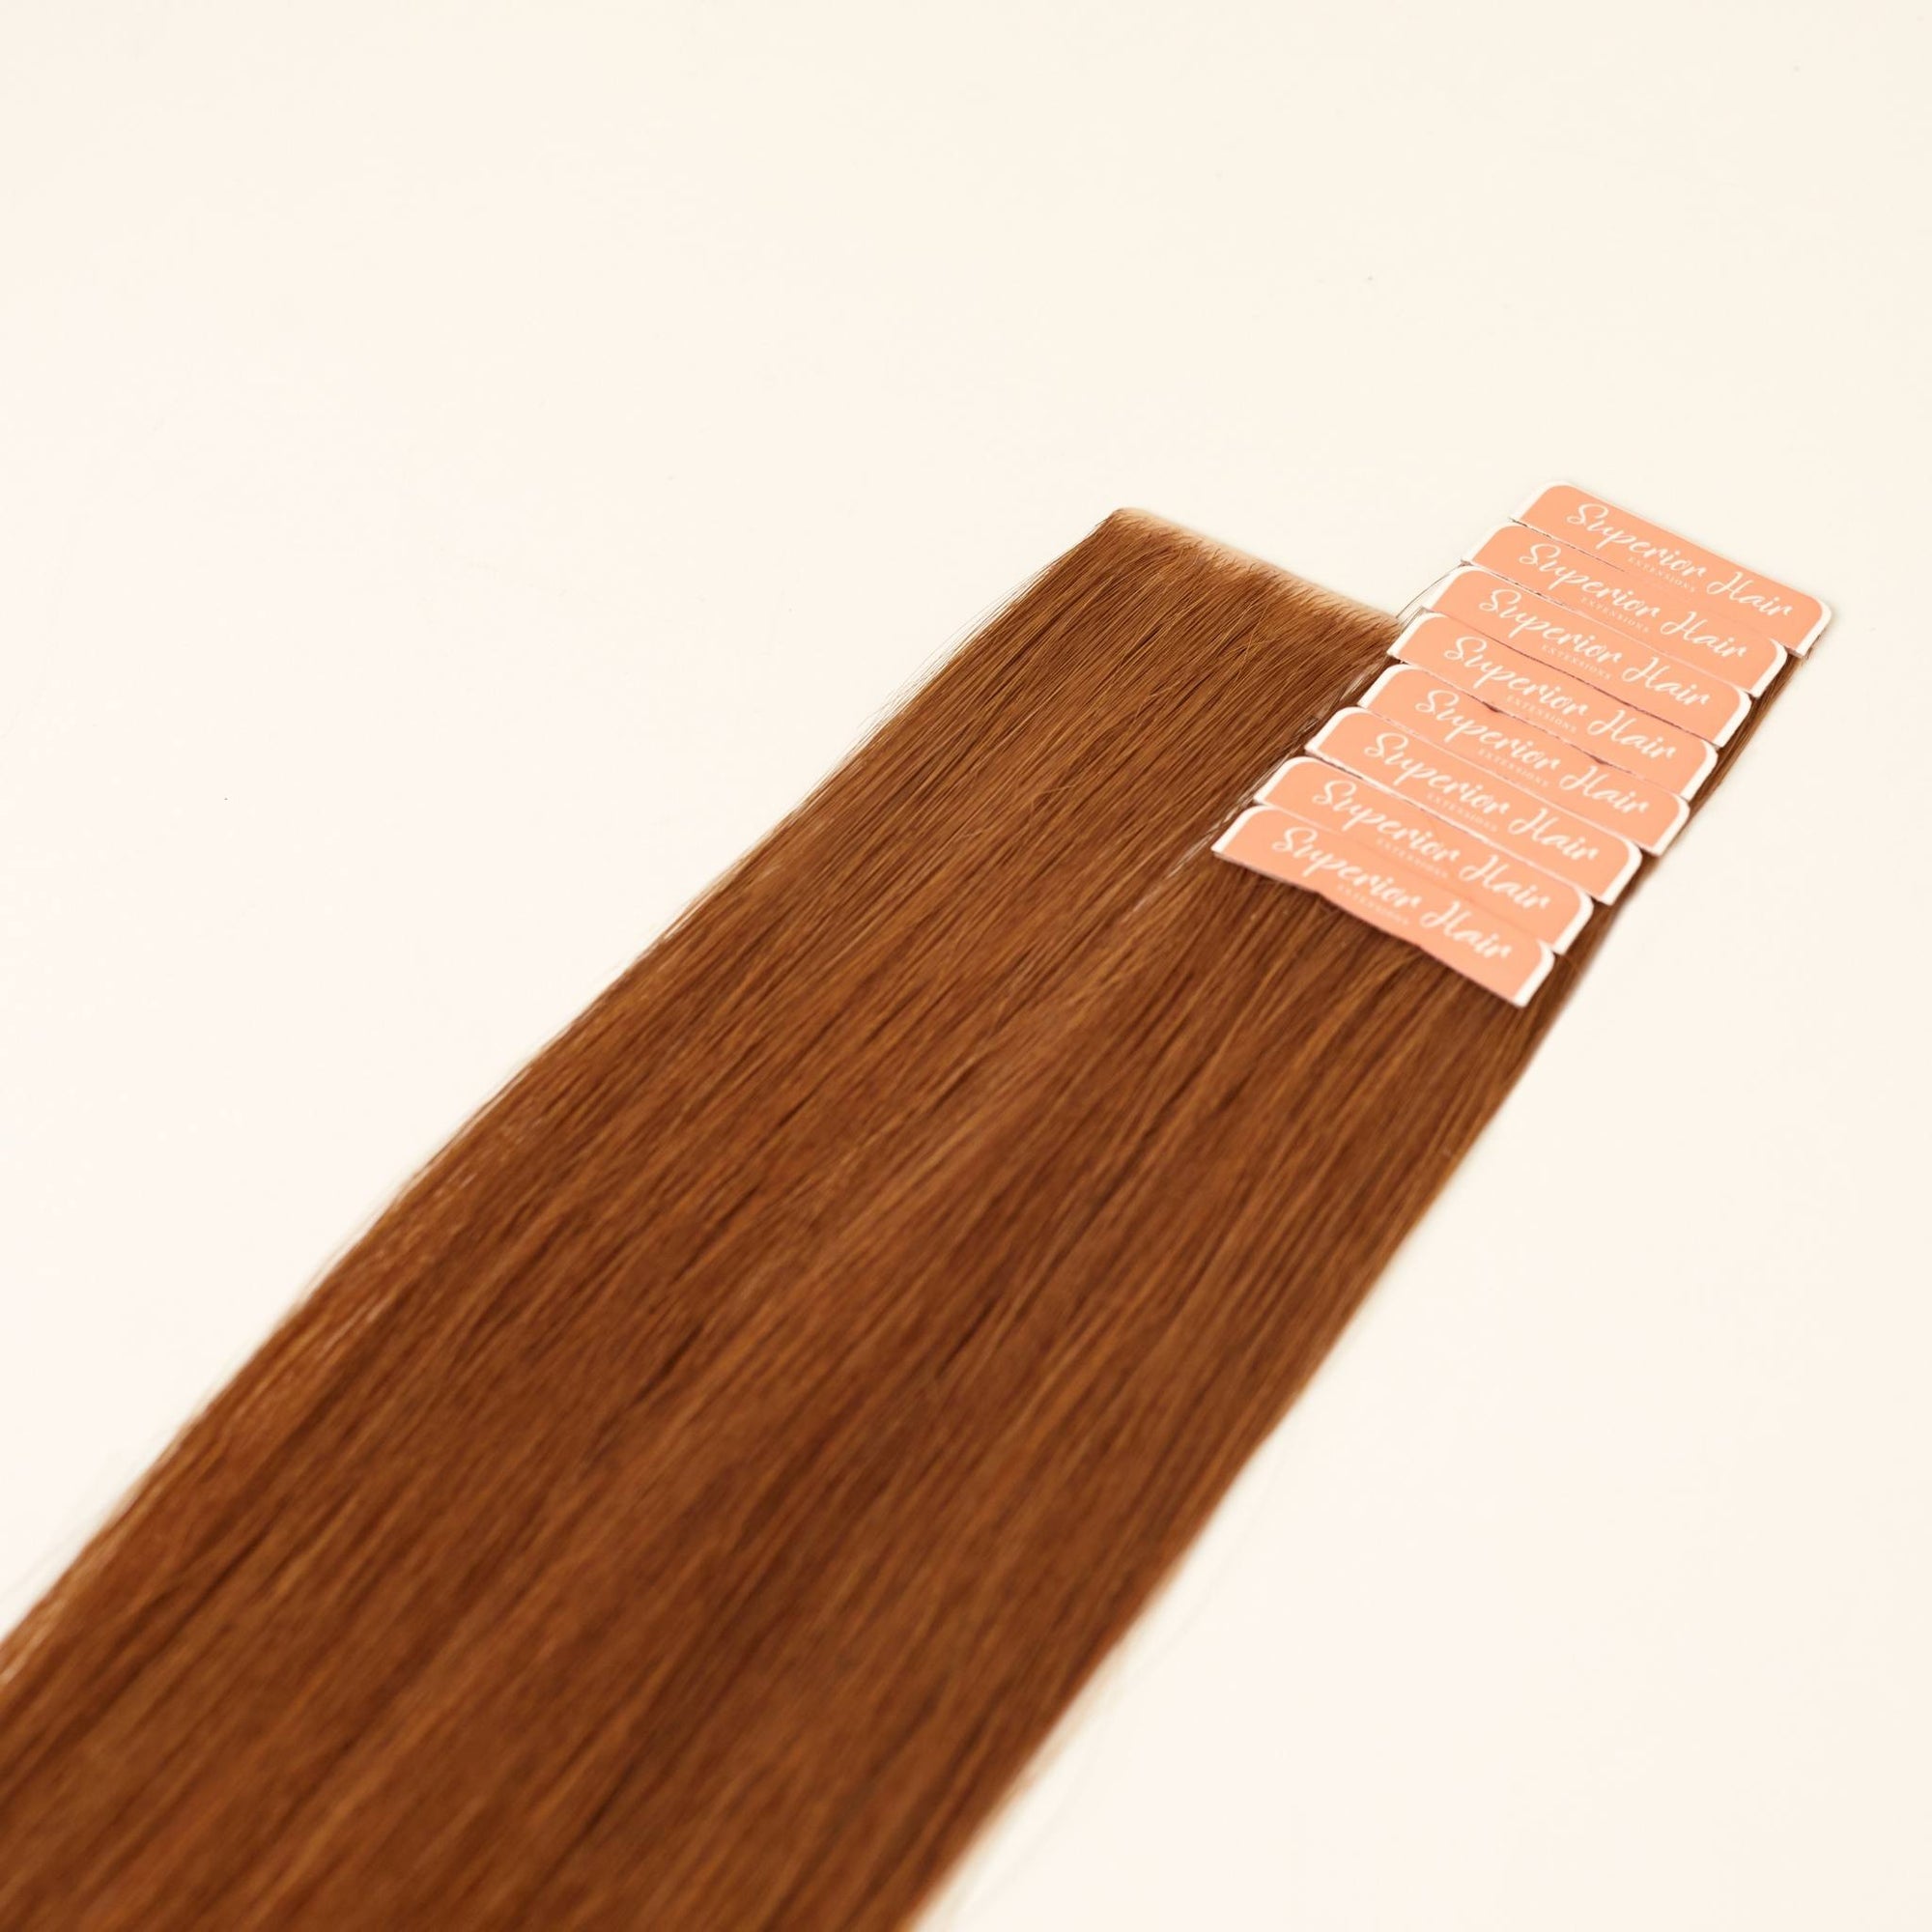 Superior Hair nvisi-tape Skin Weft Extensions